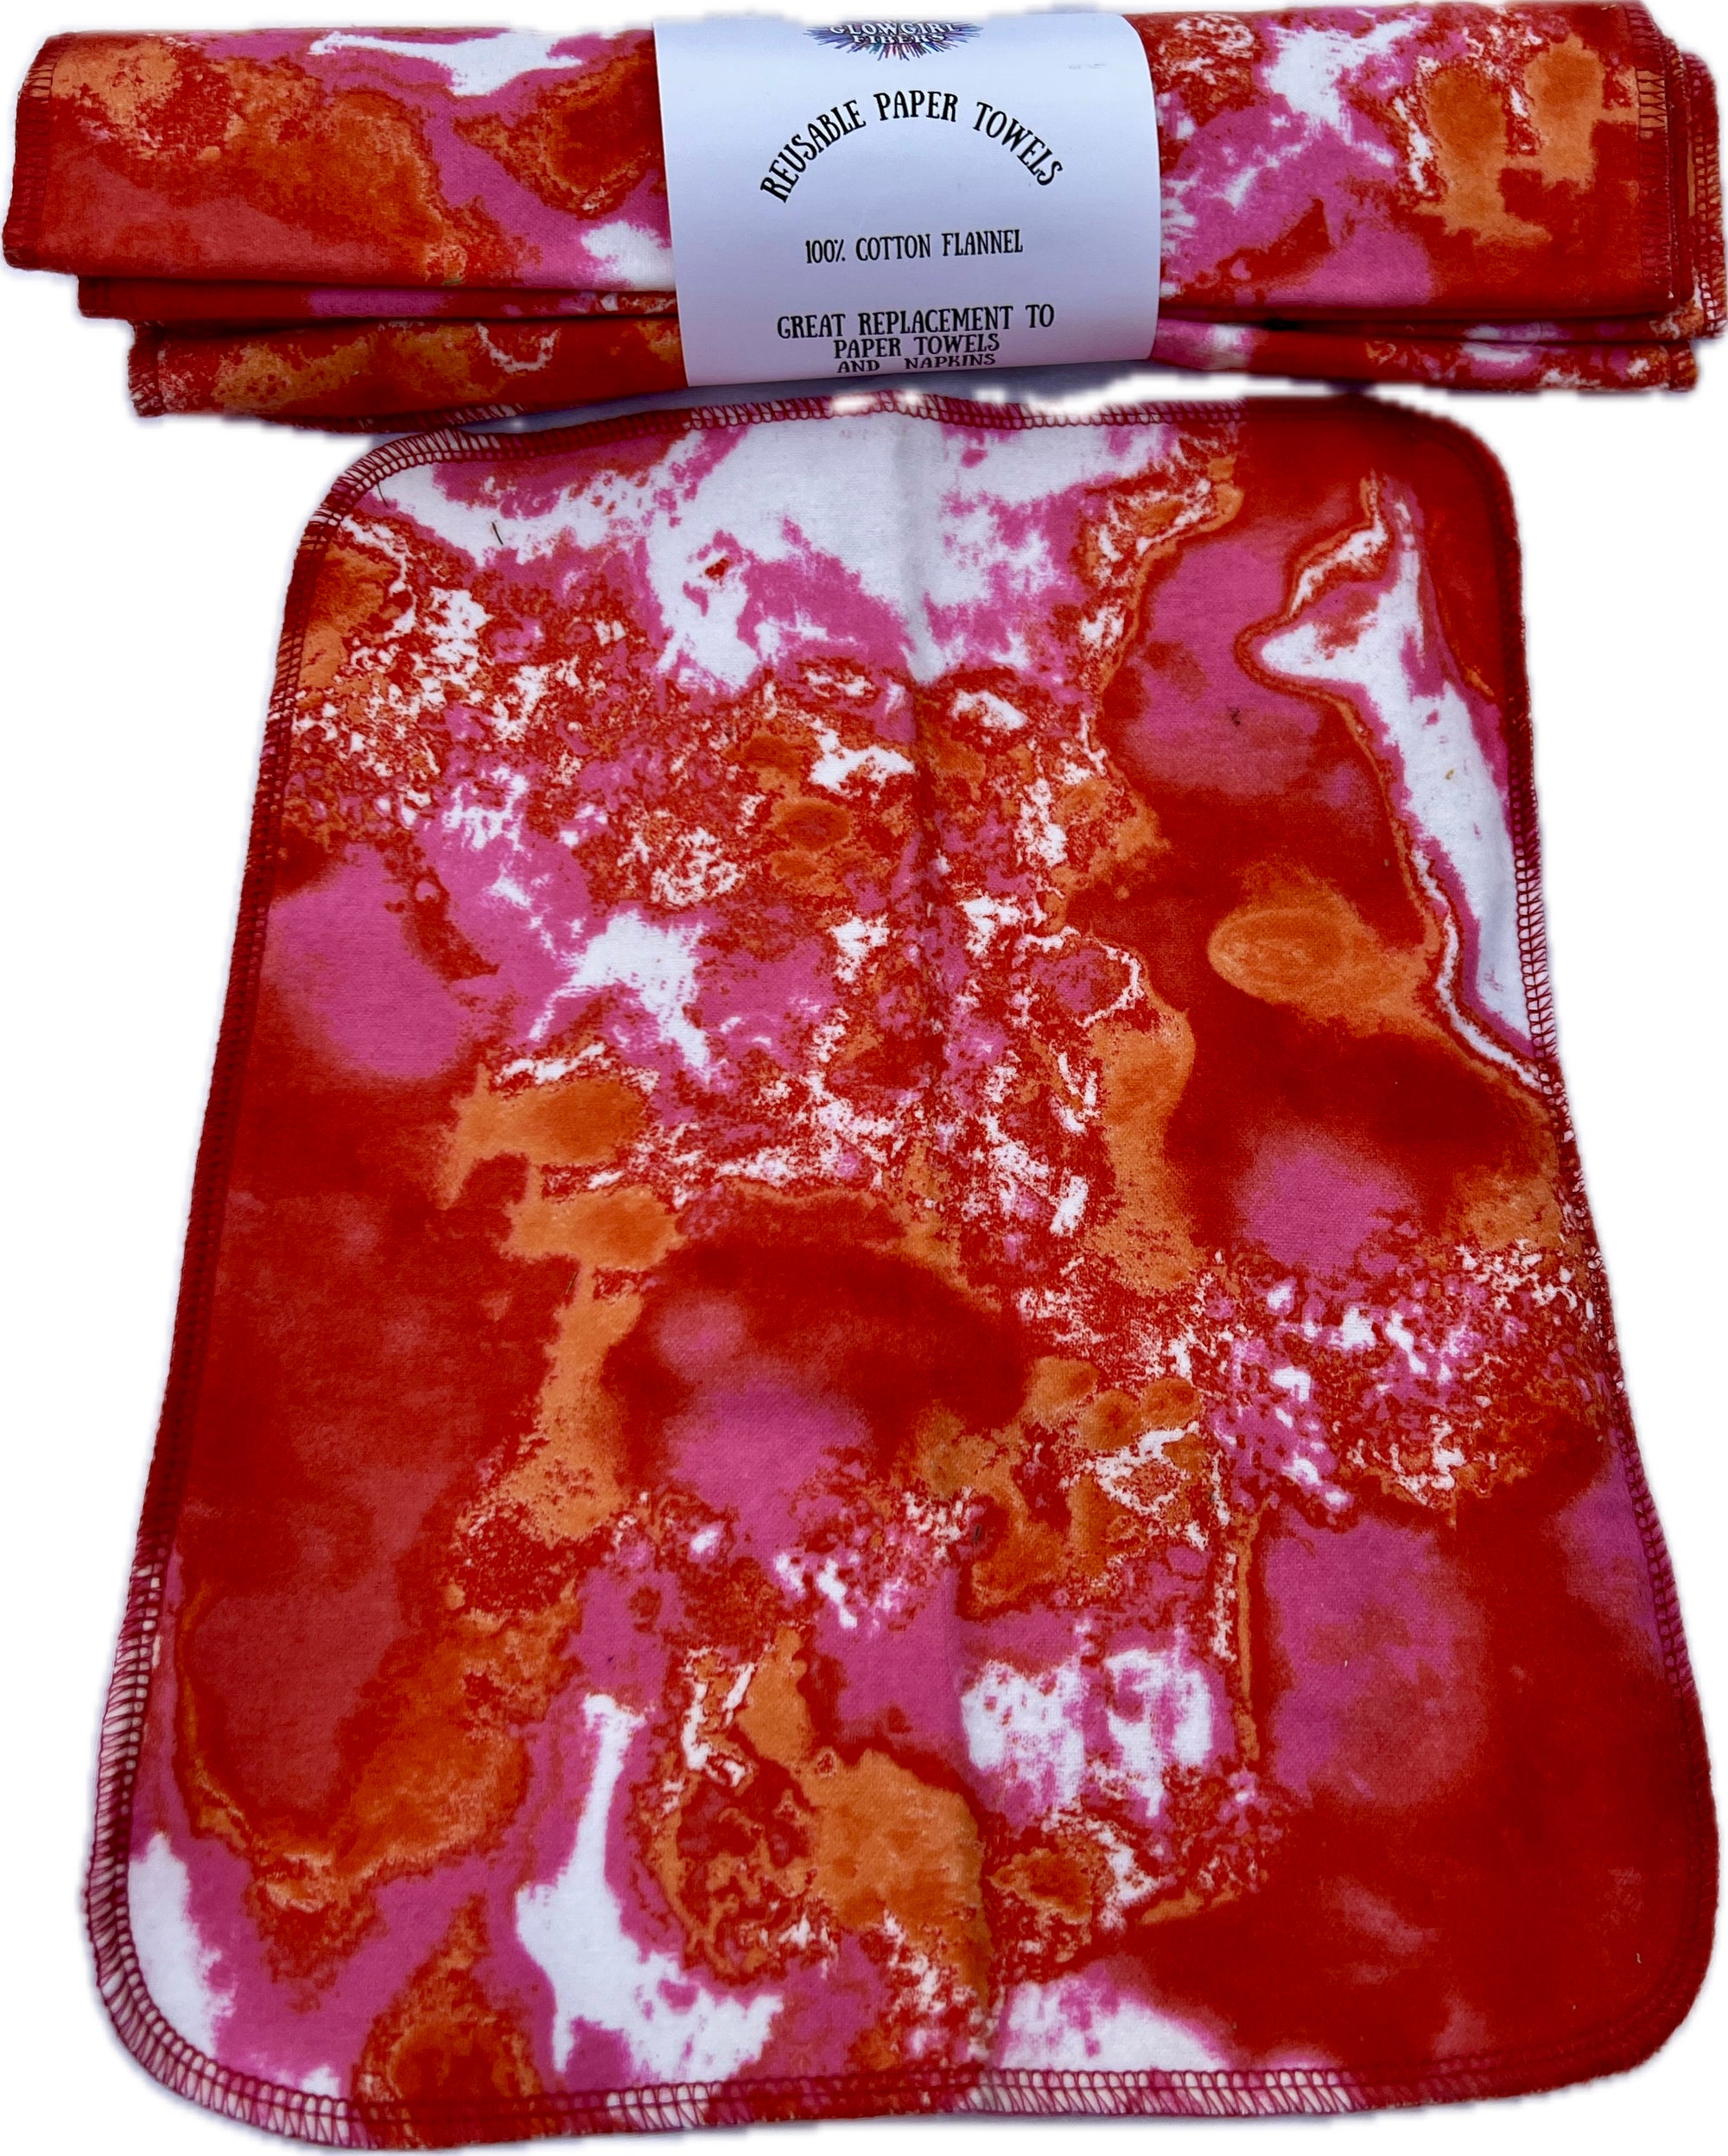 Non Paper Towels Large 10x12 Full size Sheets Set of 6  - Pink Orange and White Fluid Mix